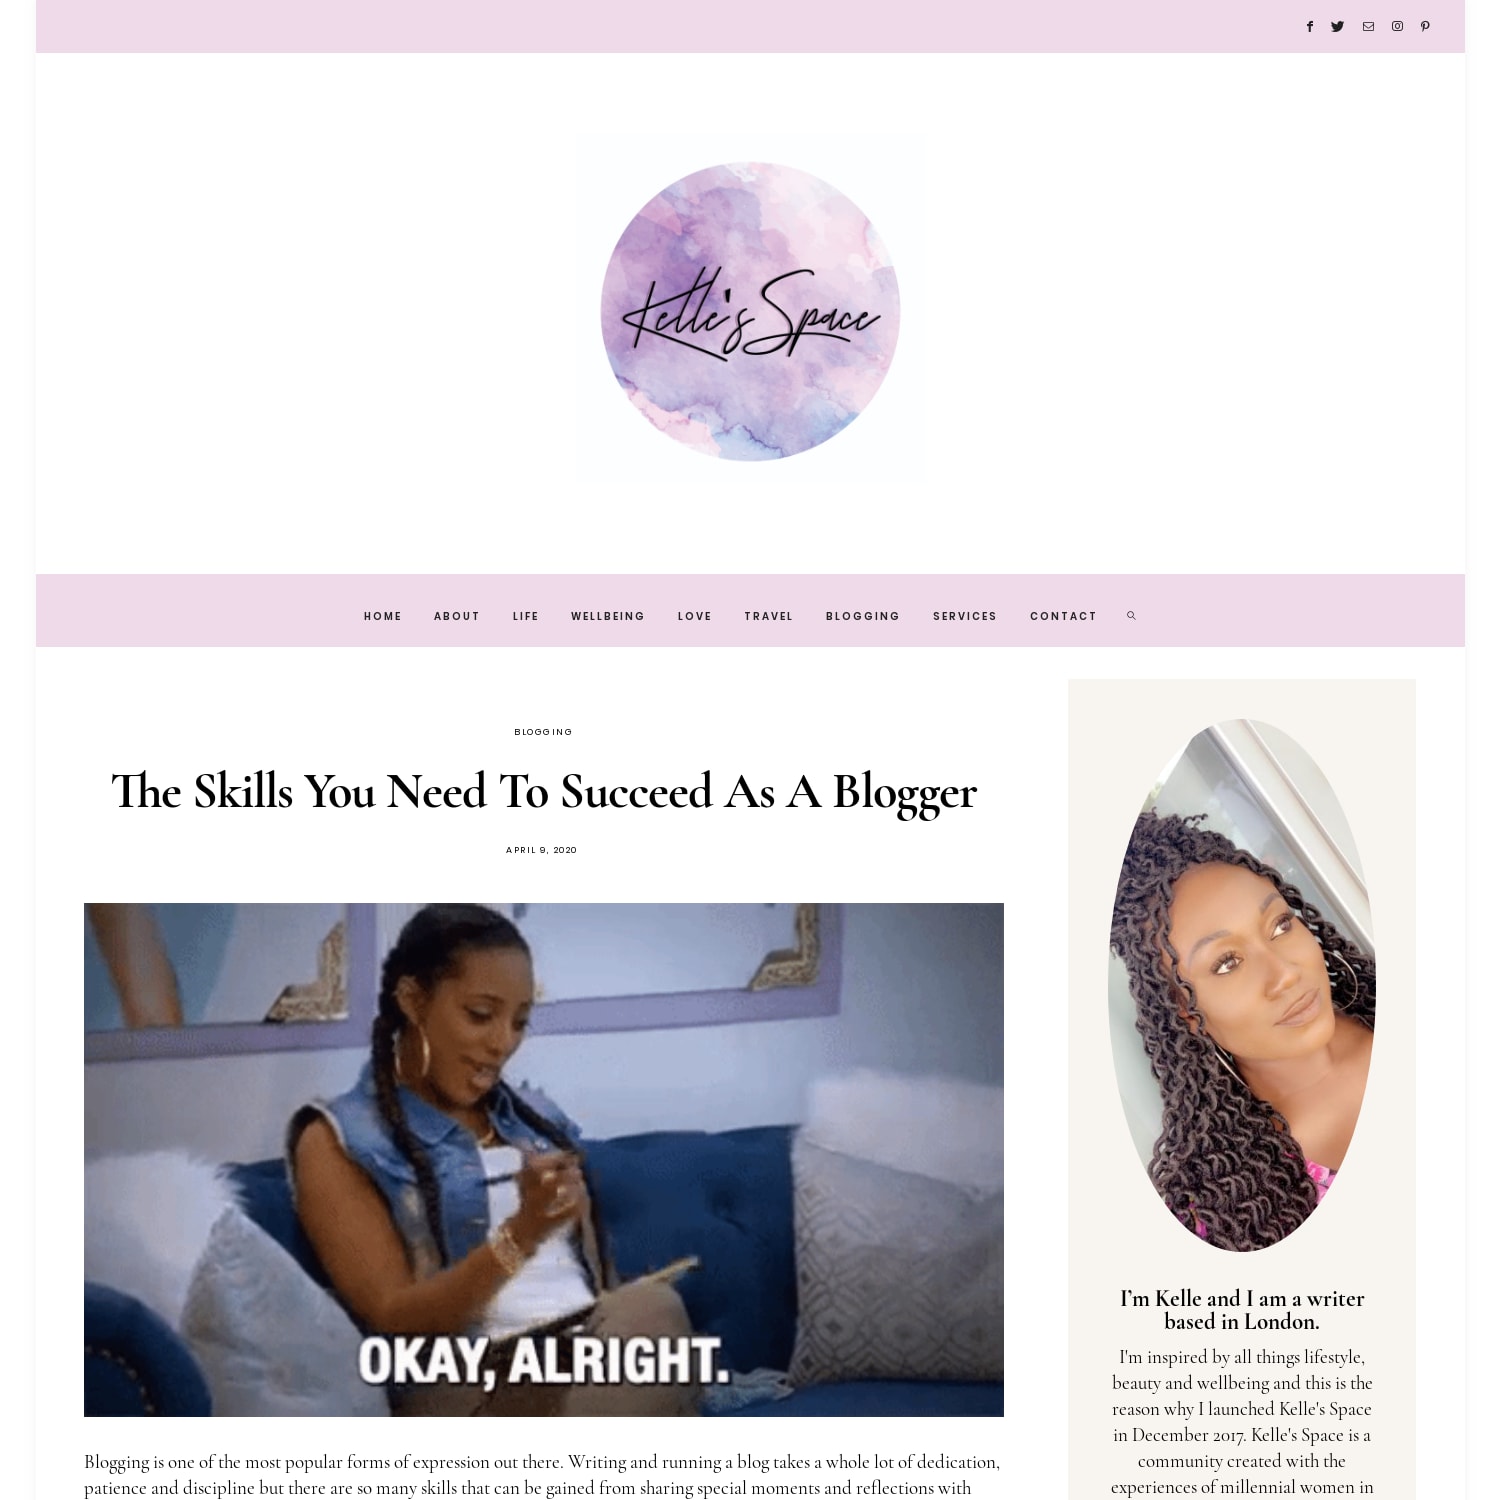 The Skills You Need To Succeed As A Blogger - Kelle's Space